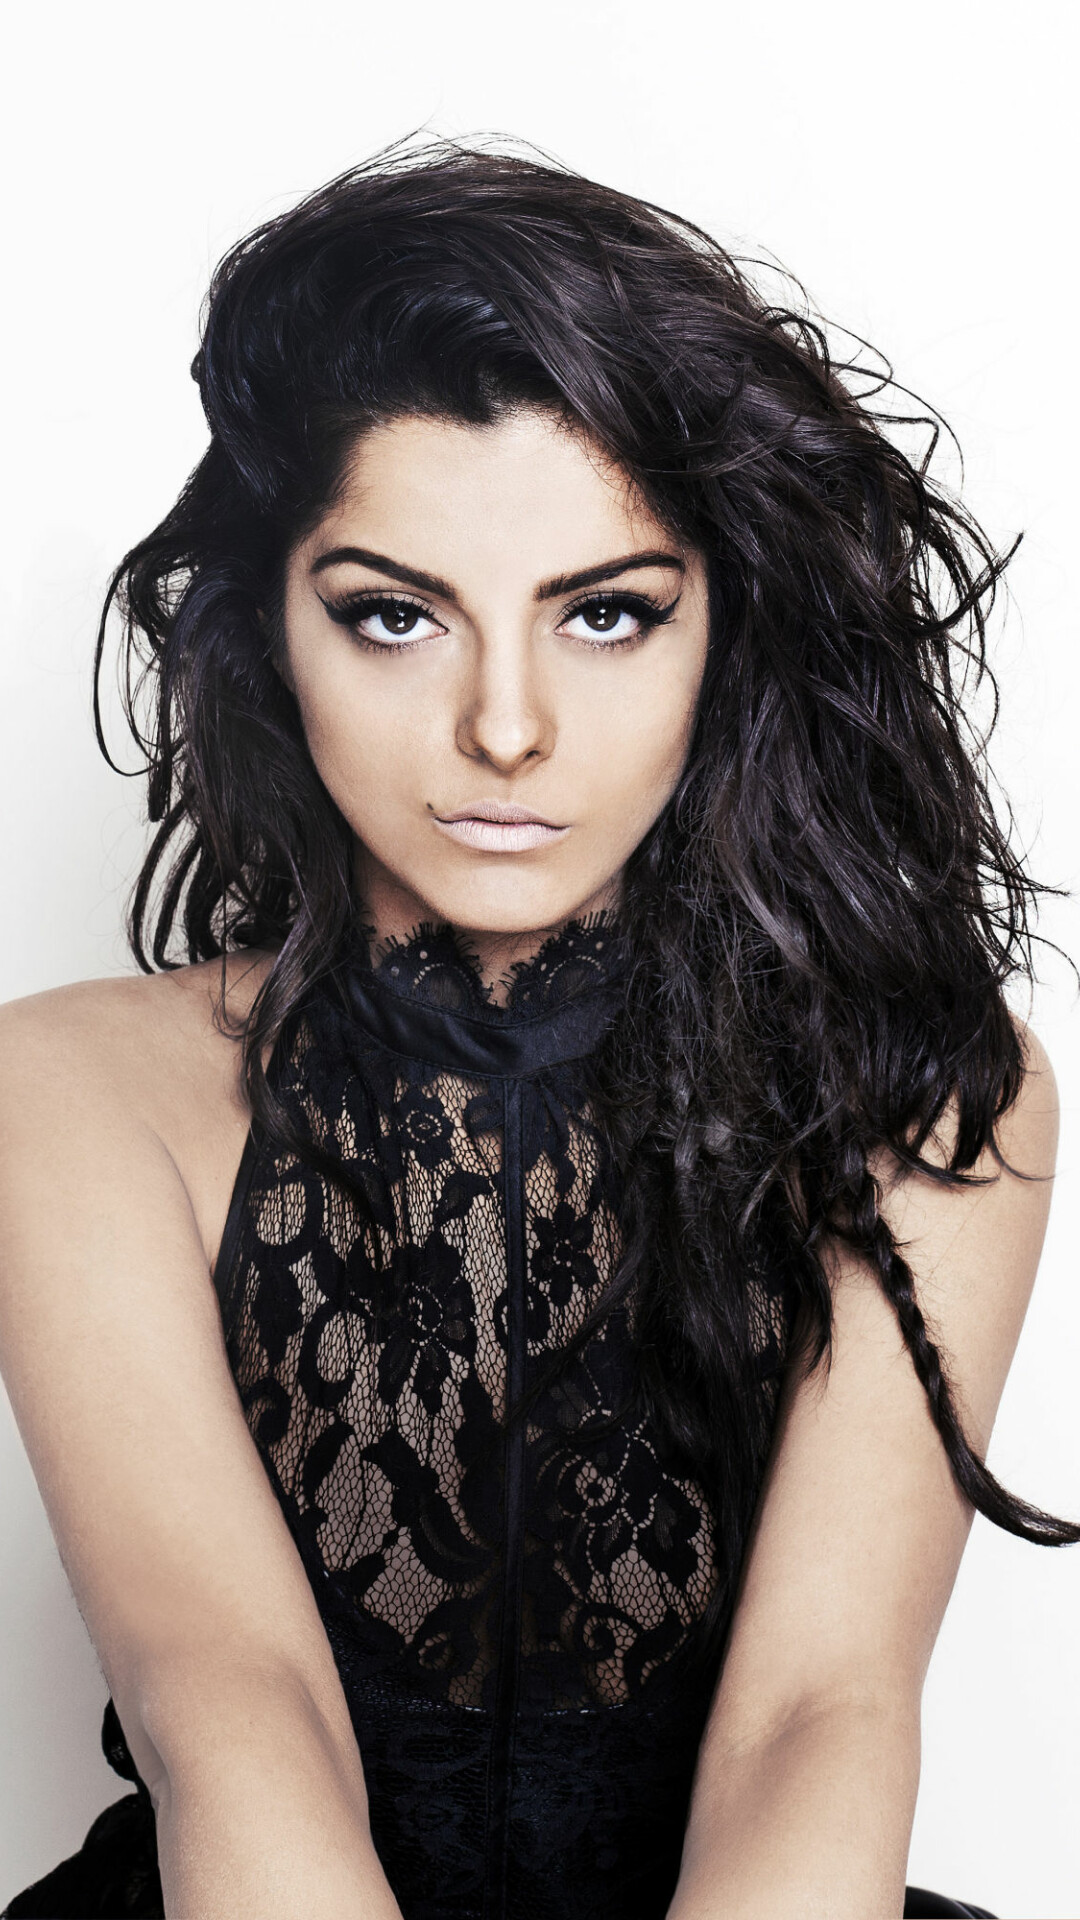 Bebe Rexha: An American singer, songwriter, and record producer. 1080x1920 Full HD Wallpaper.